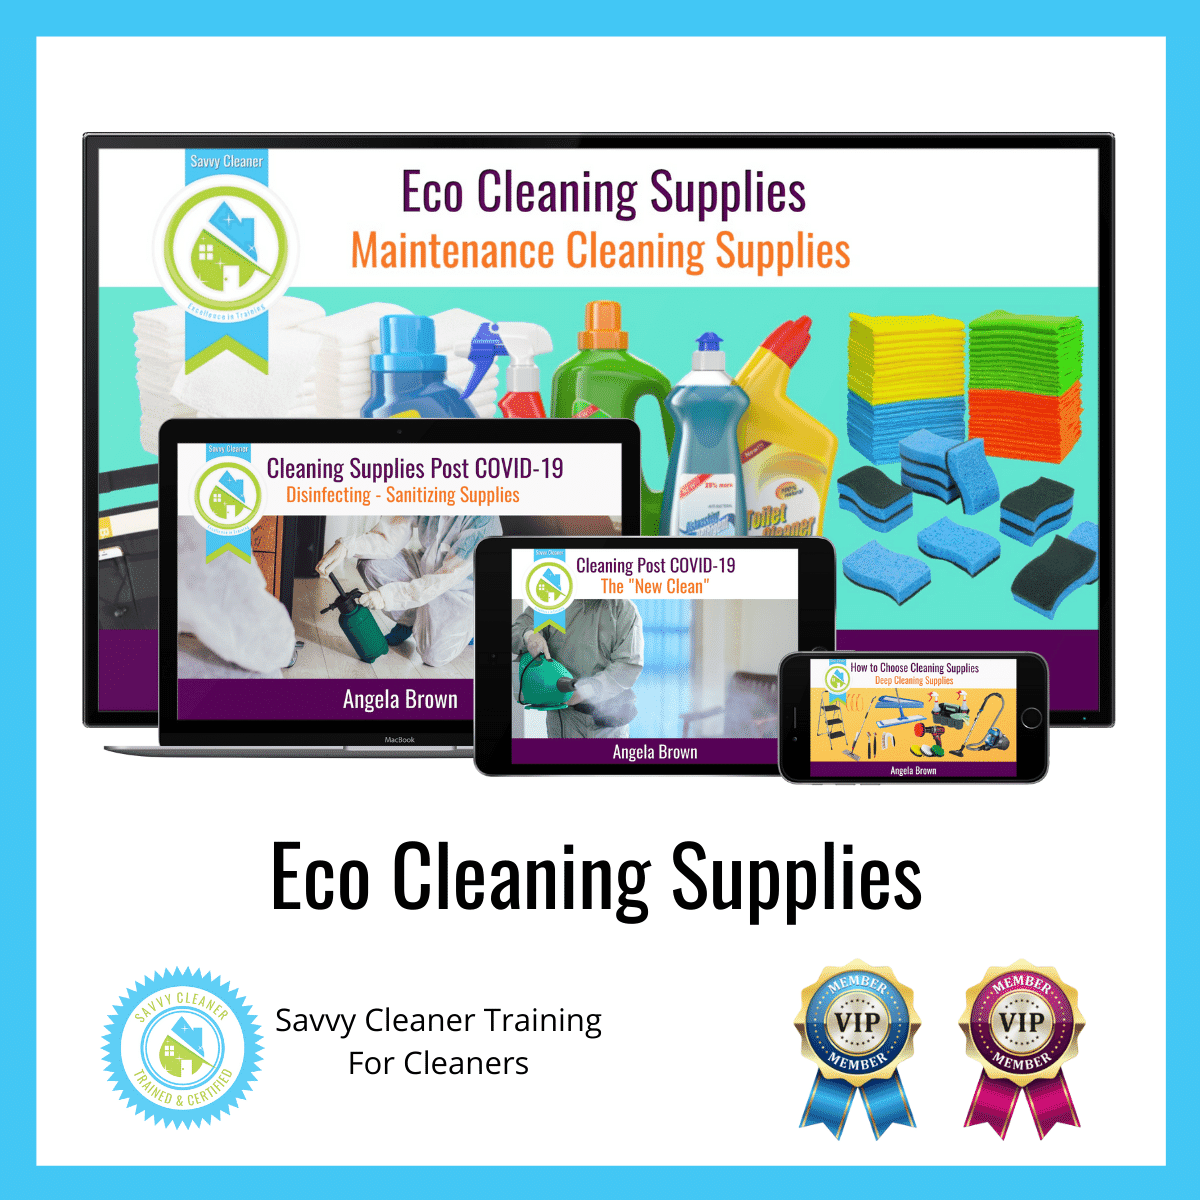 09 Eco Cleaning Supplies